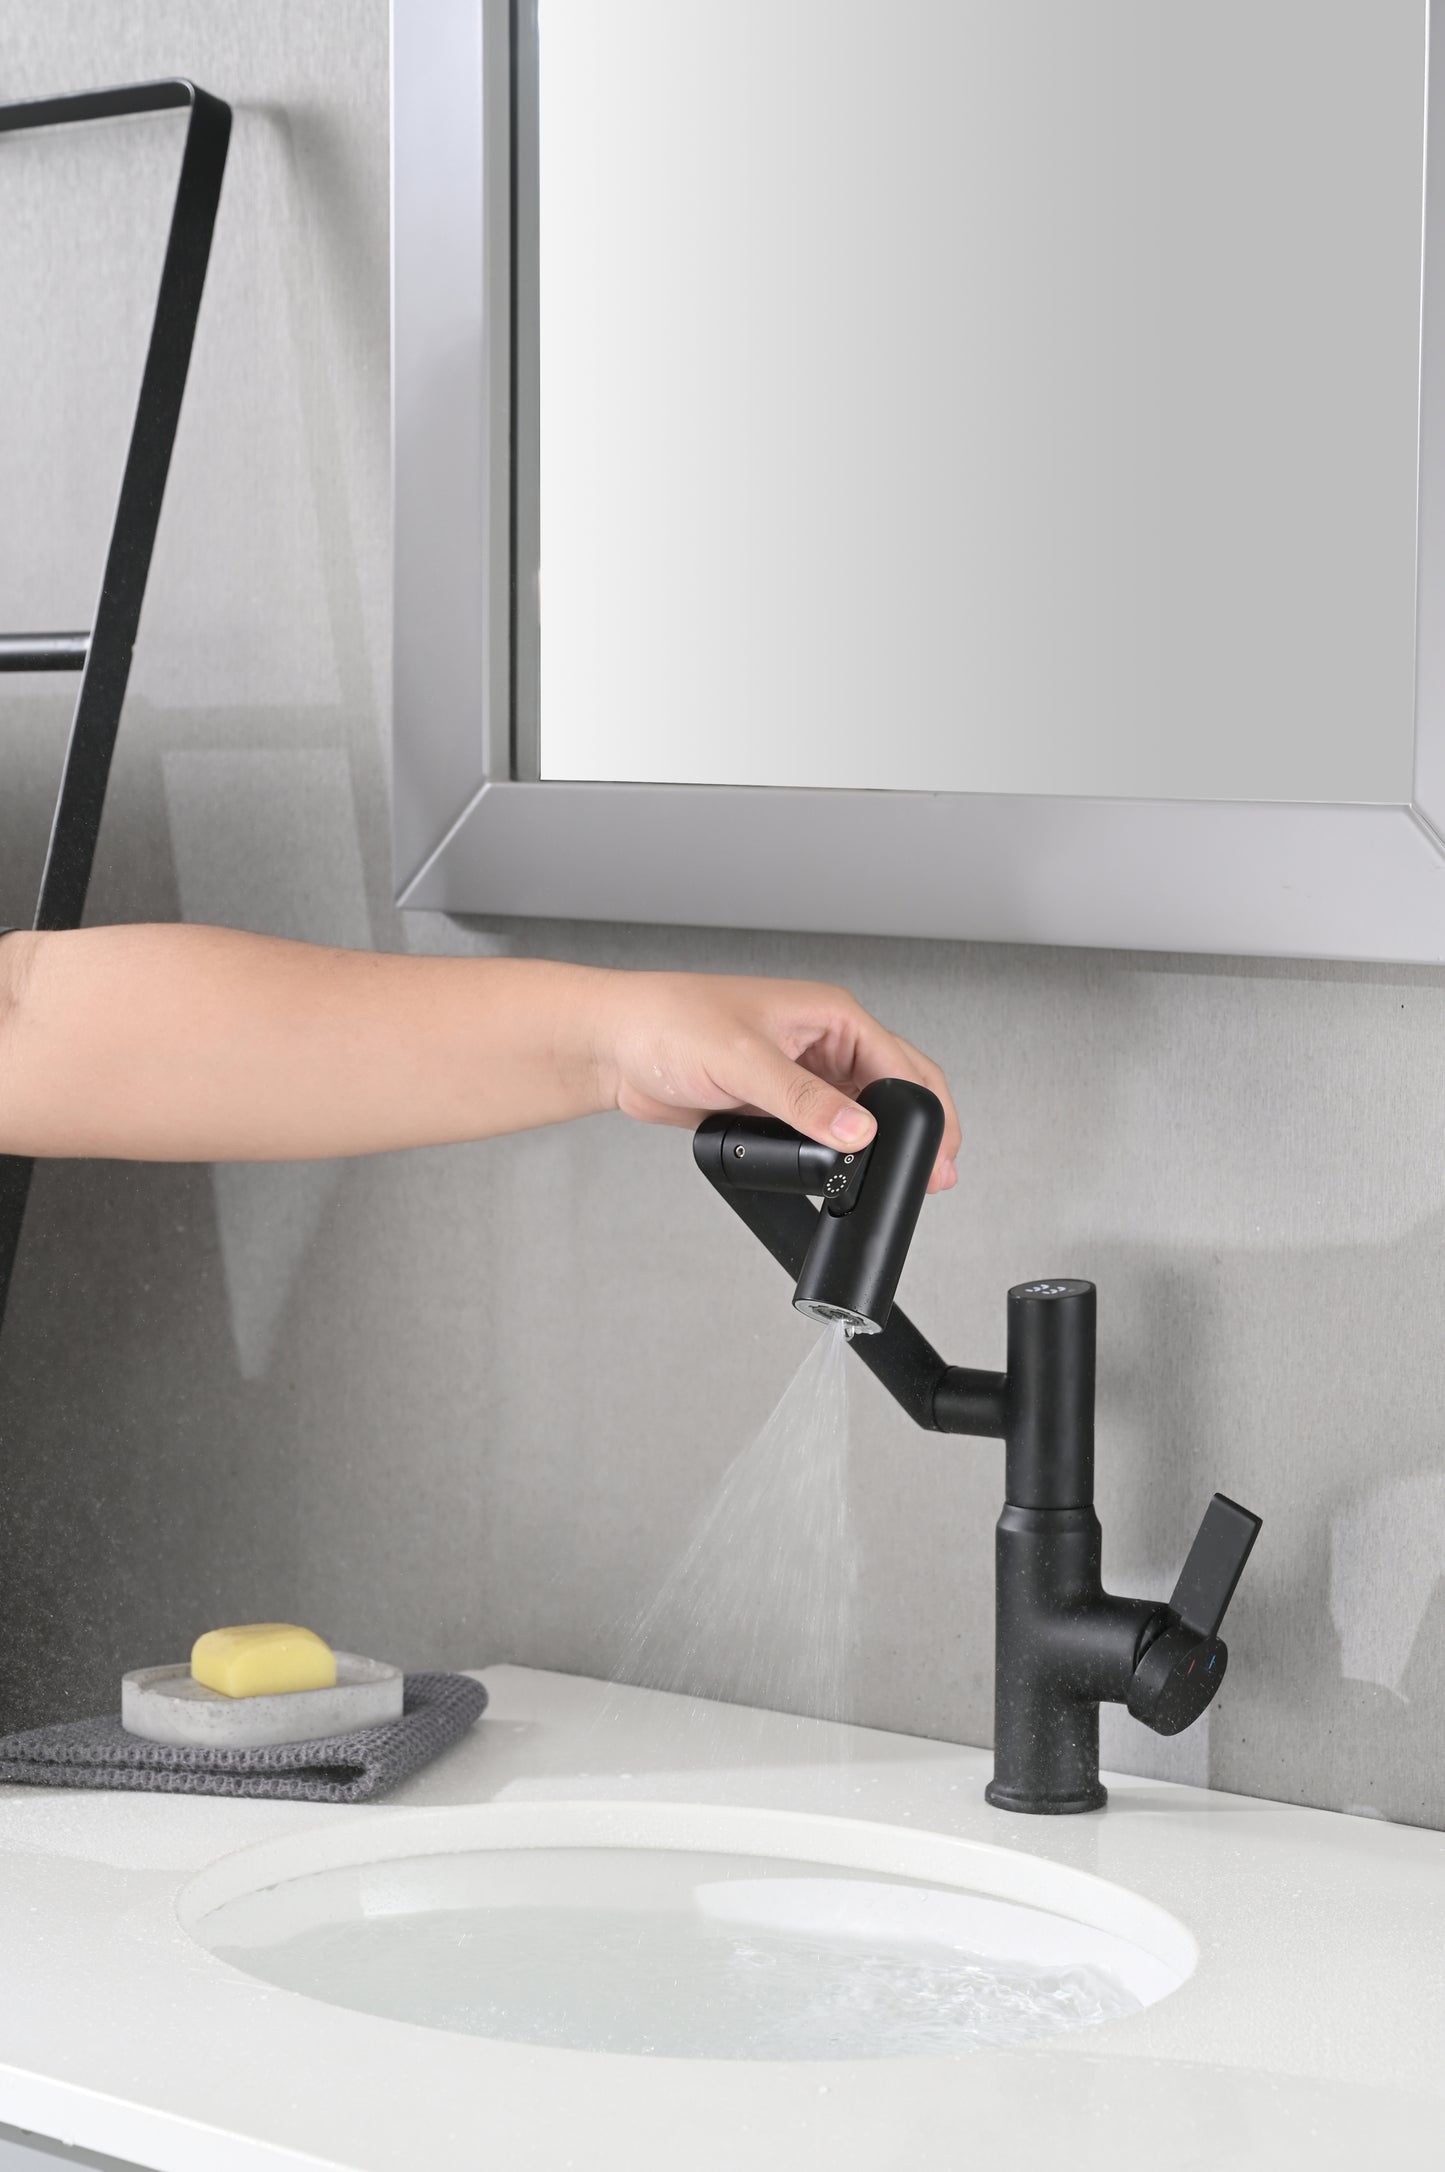 Matte Black Bathroom Sink Faucet with Temperature Display and 360° Rotary Movement featuring Spray Function and Anti-Skid Switch